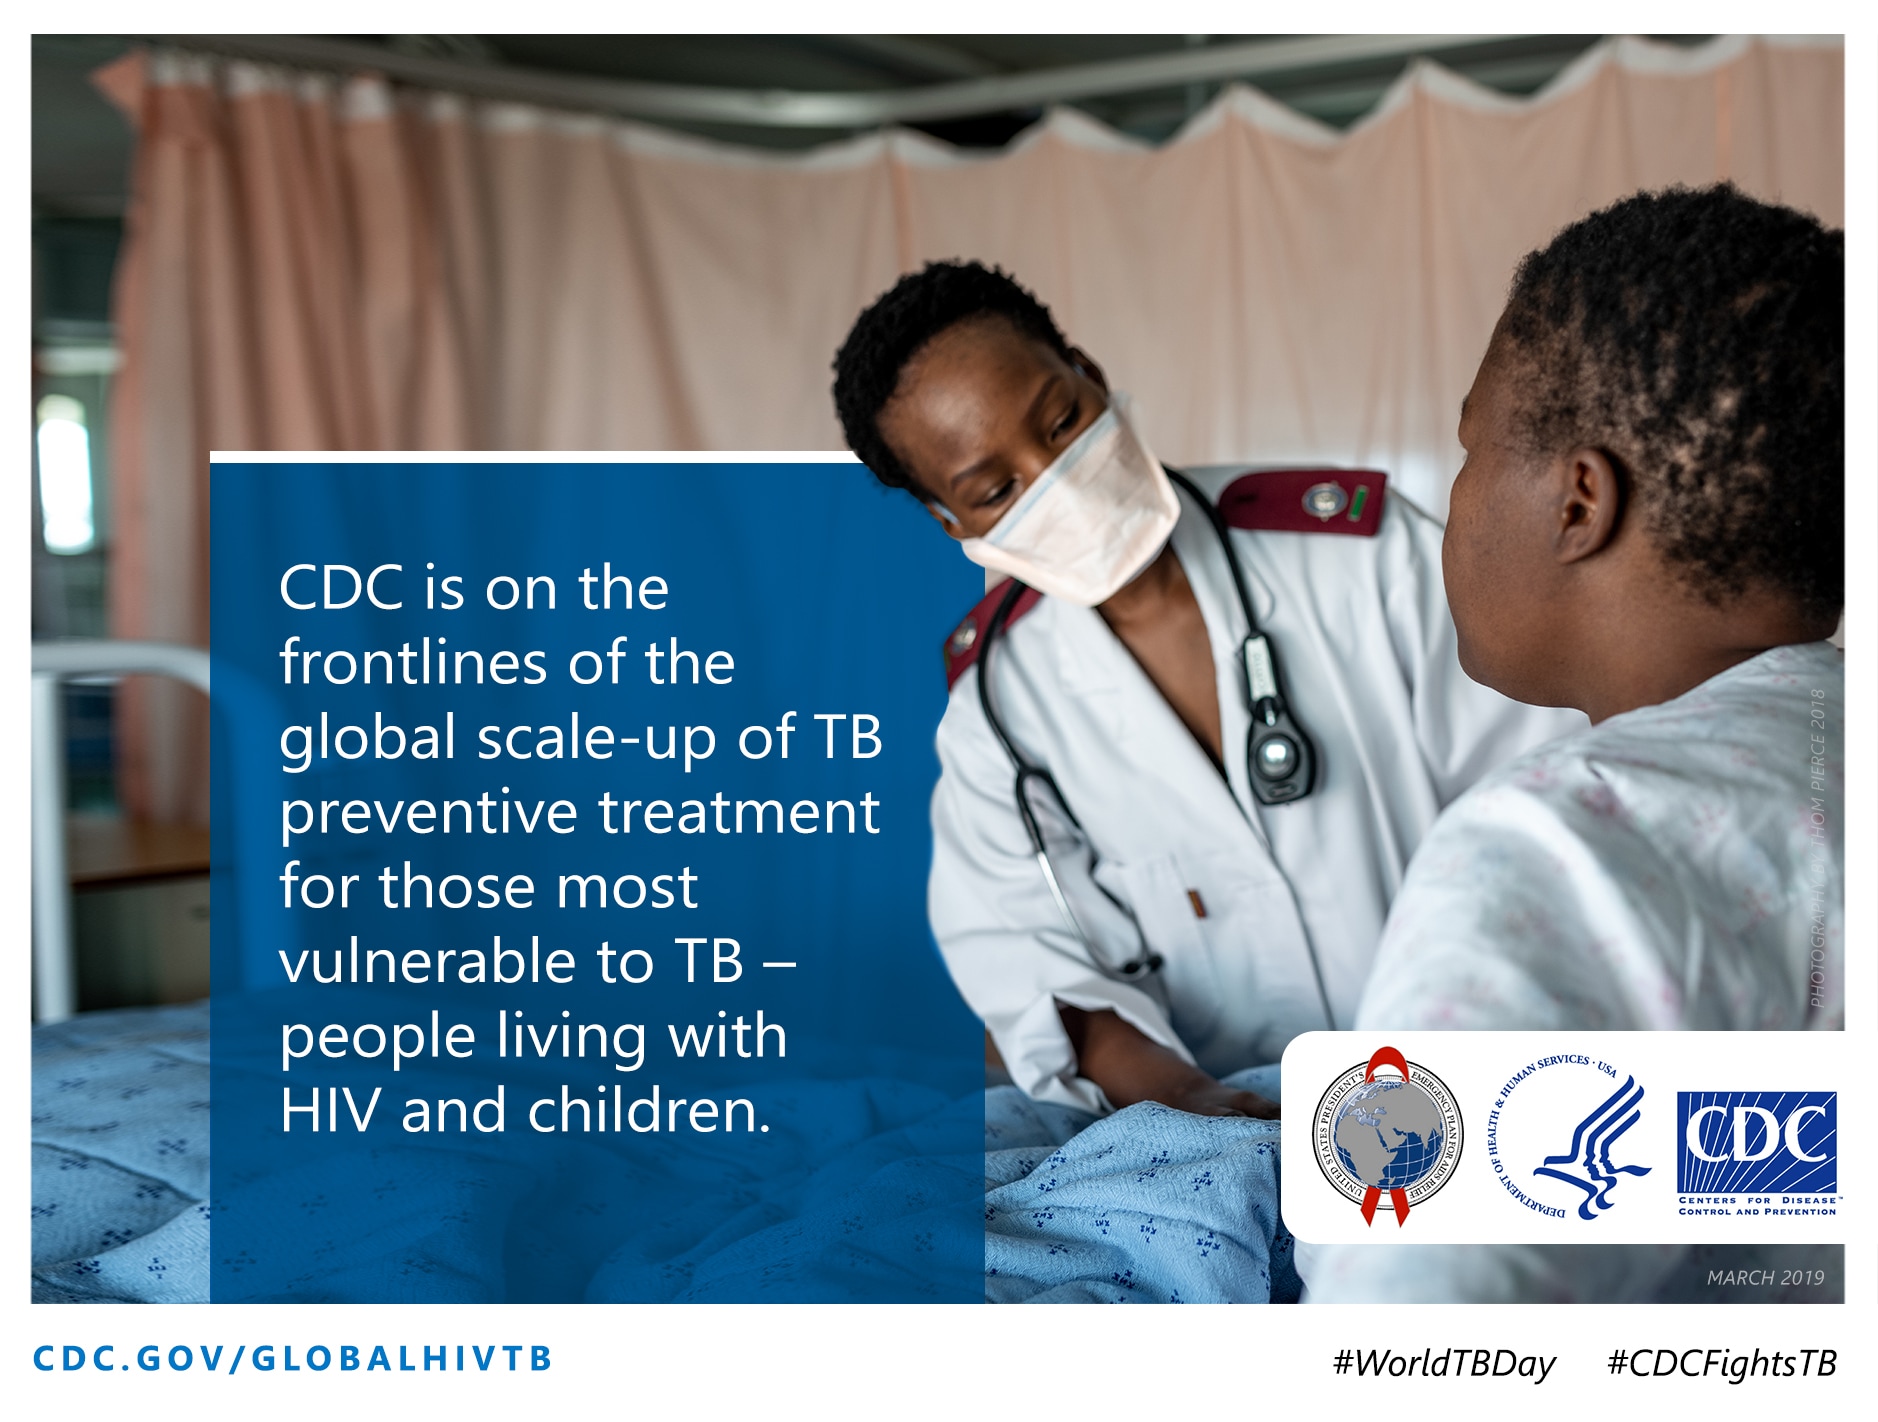 Image, doctor examines patient. CDC is on the frontllines of the global scale-up of TB preventive treatment for those most vulnerable to TB - people living with HIV and children.